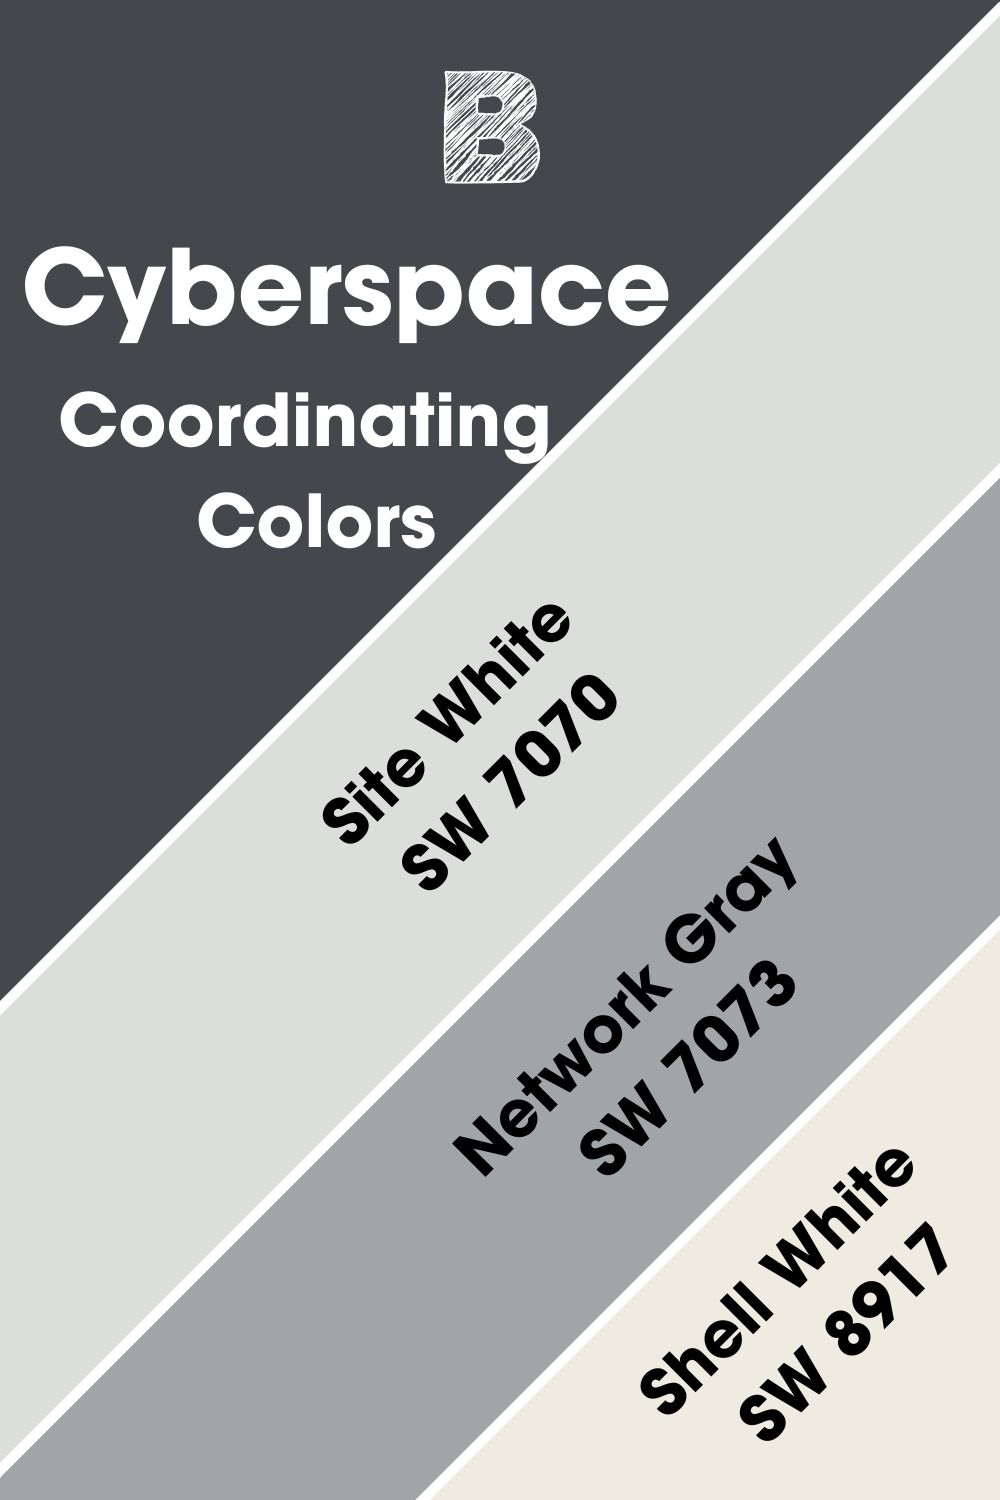 Sherwin Williams Cyberspace Coordinating Colors